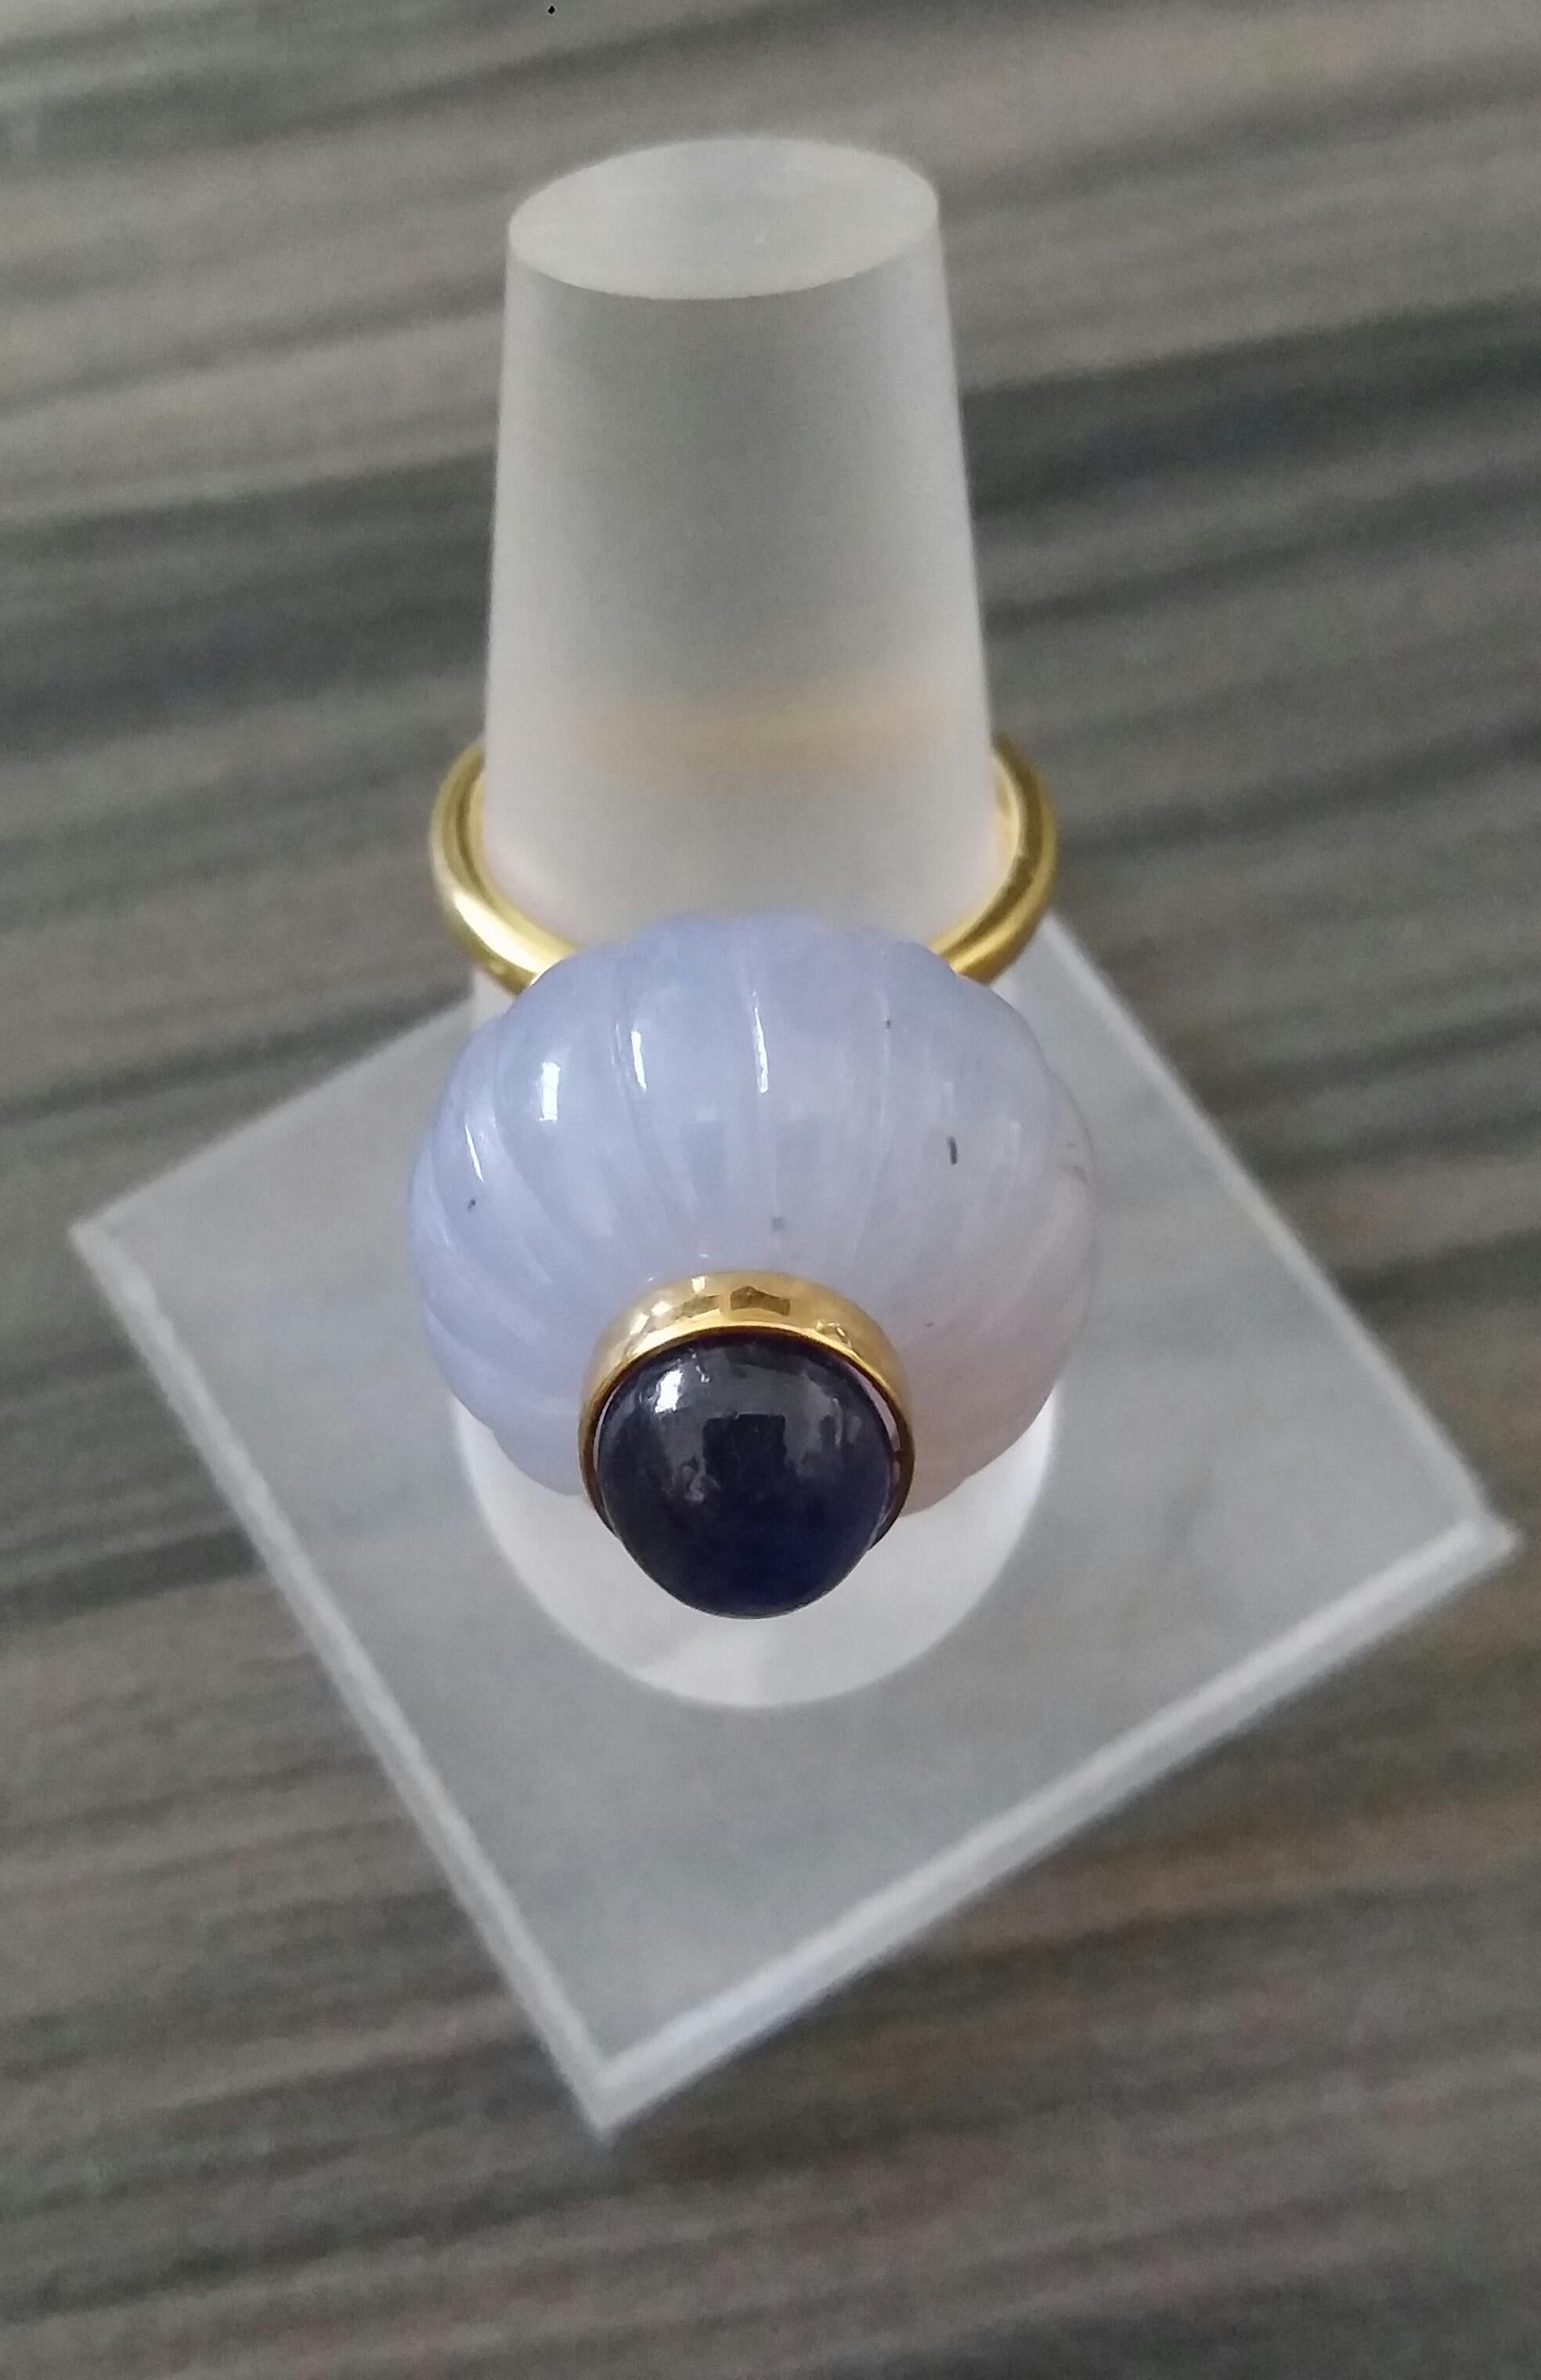 sapphire ring for sale